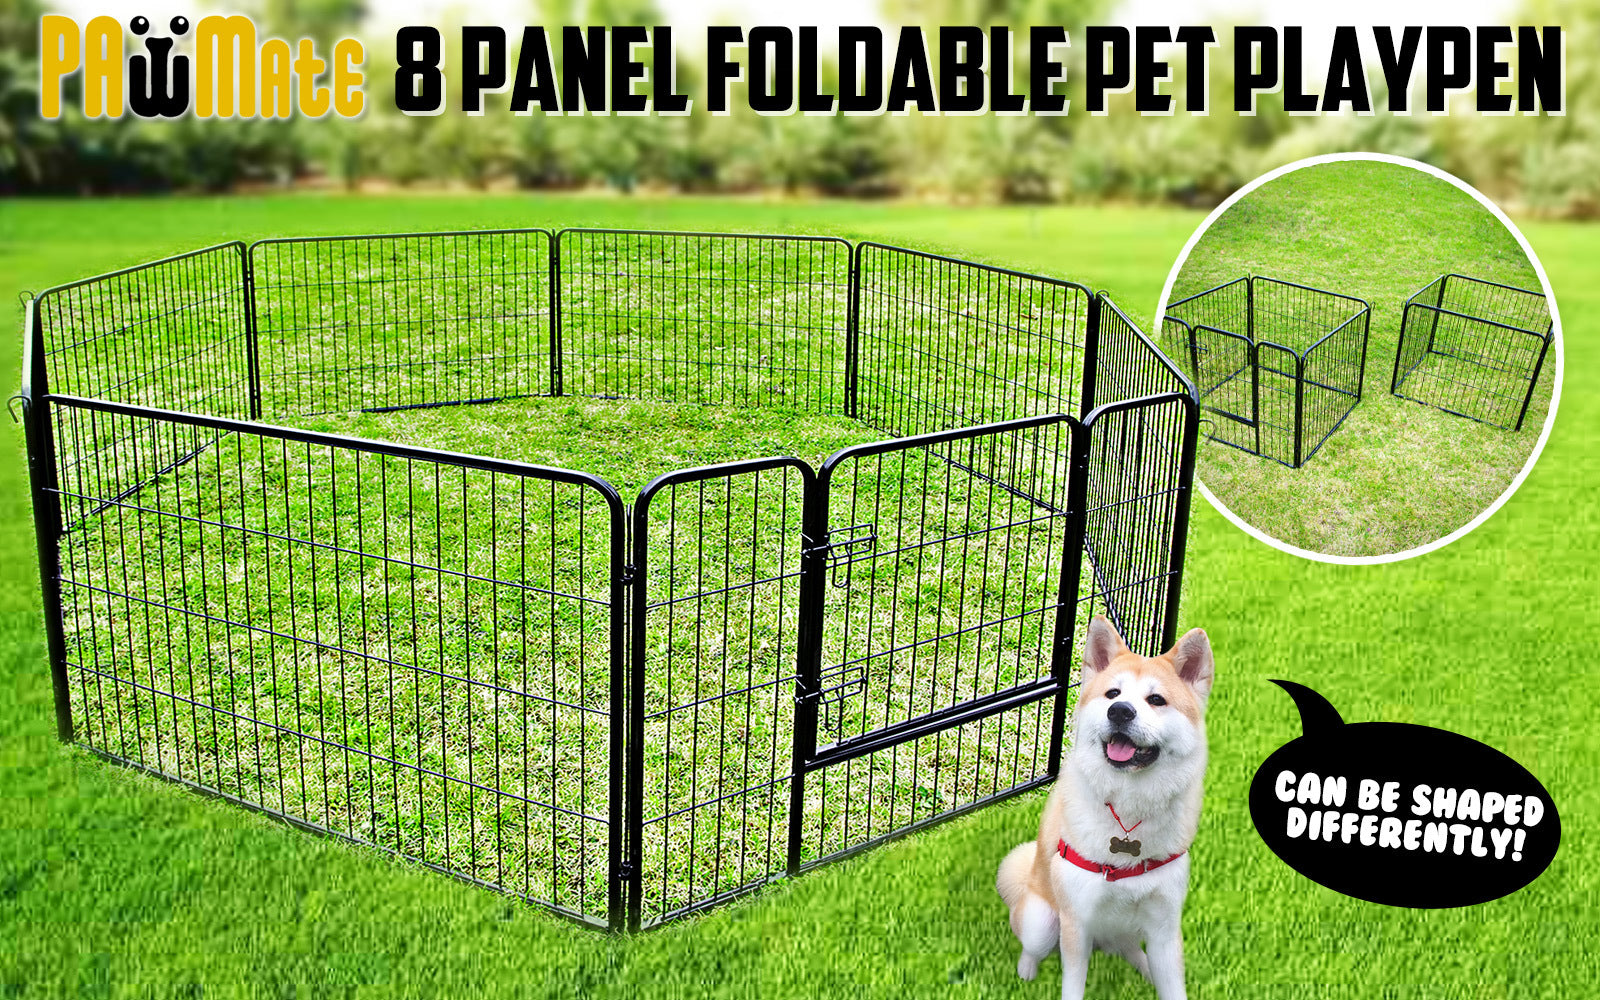 Pet Playpen Heavy Duty 31in 8 Panel Foldable Dog Exercise Enclosure Fence Cage - image2